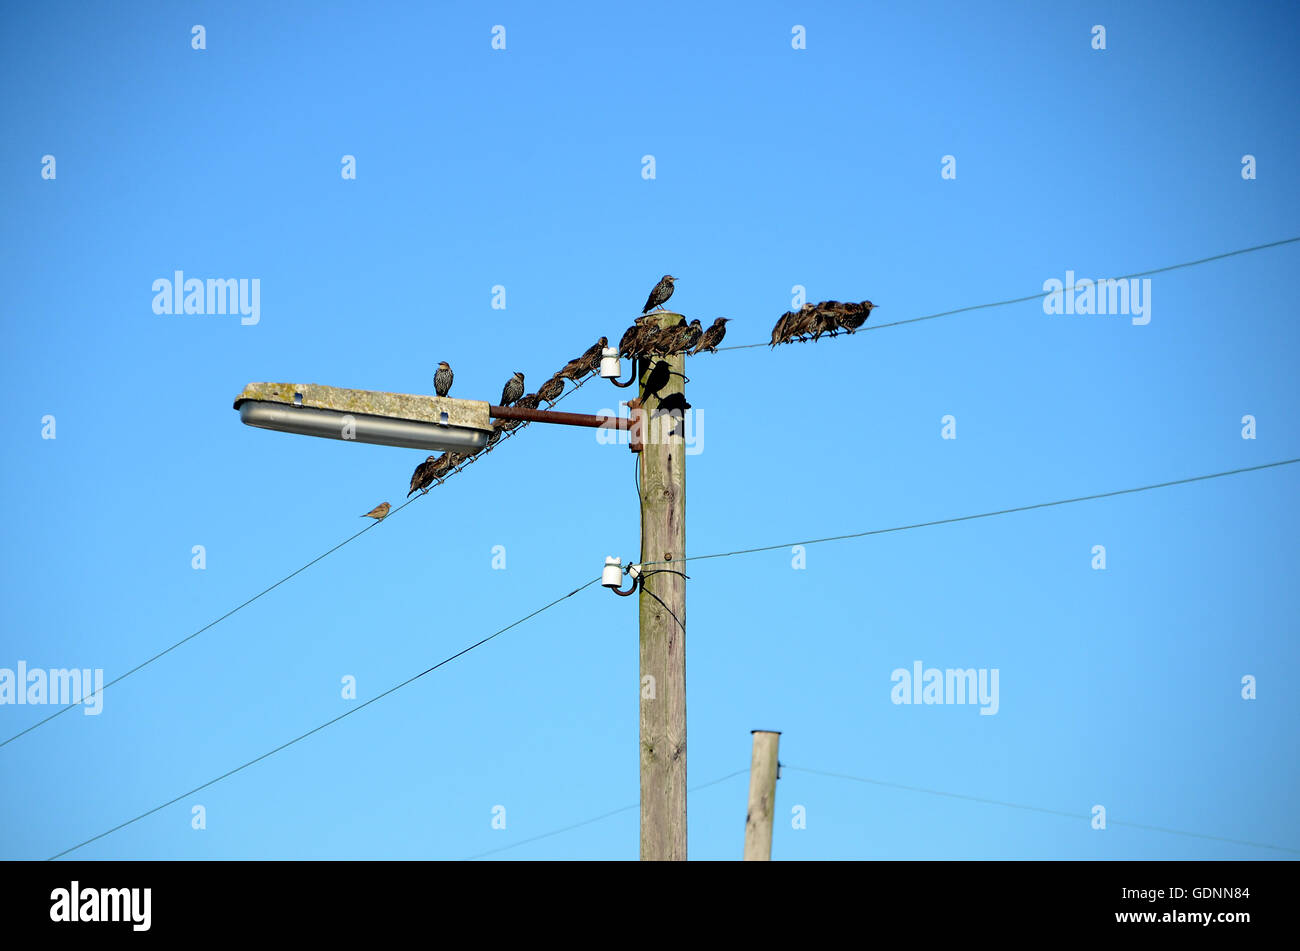 Migratory birds find together on electricity wires in autumn, before they start the migration to warmer areas for the winter. Stock Photo